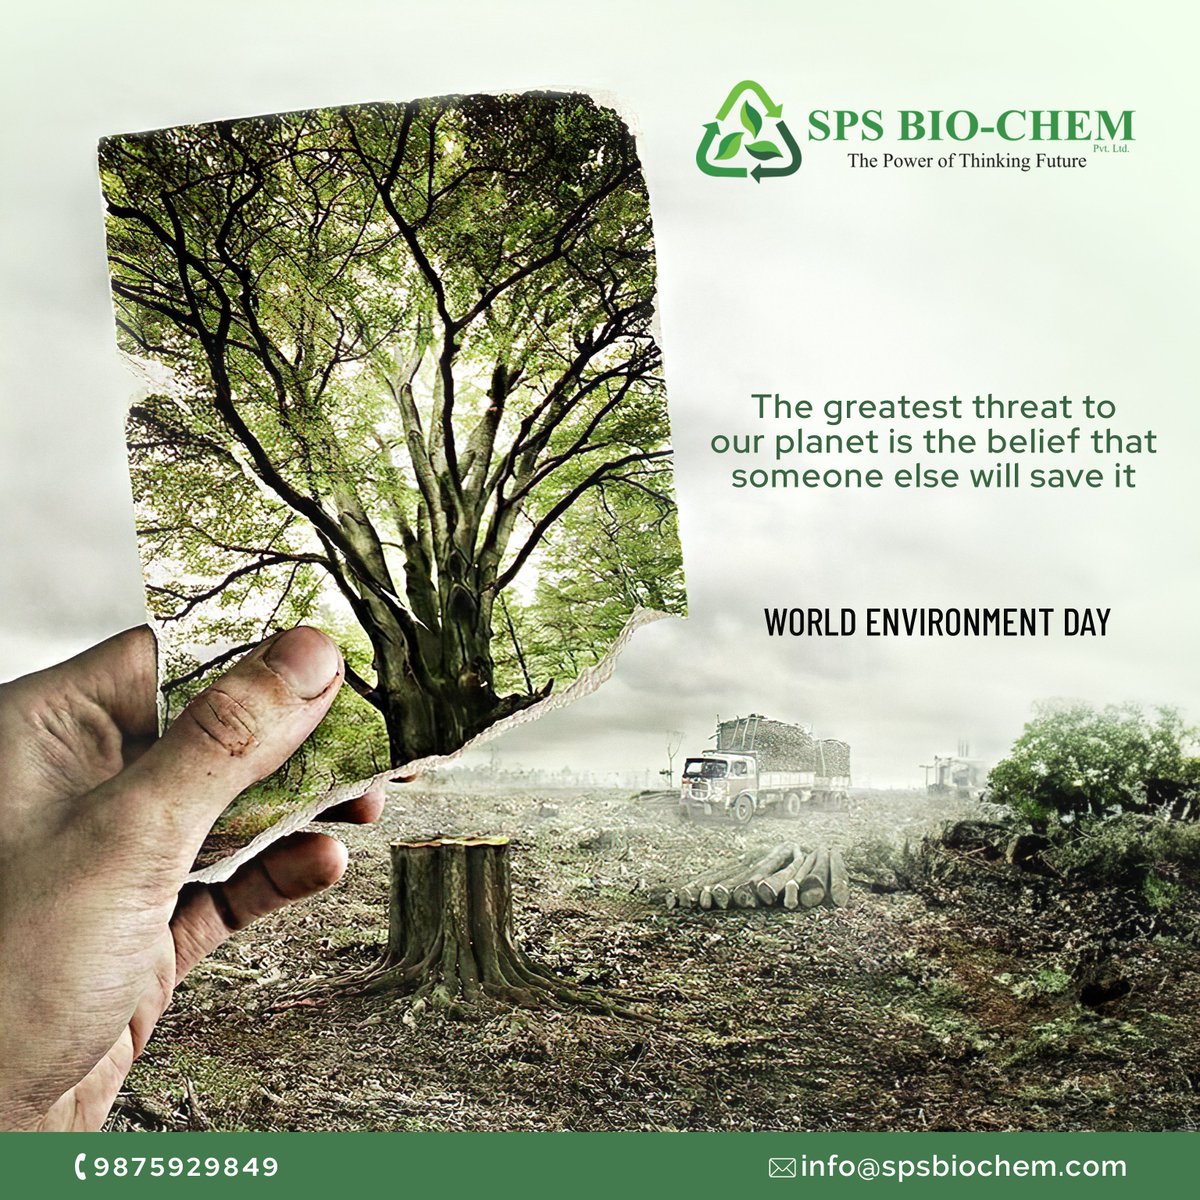 On World Environment Day, let's pledge to make our planet more beautiful by embracing sustainable practices. #worldenvironmentday #greenplanet #compressedbiogas #protectourplanet #organicfertilizer #betterfuture #safefuture #gogreen #ecofriendly #reducewaste #spsbiochem